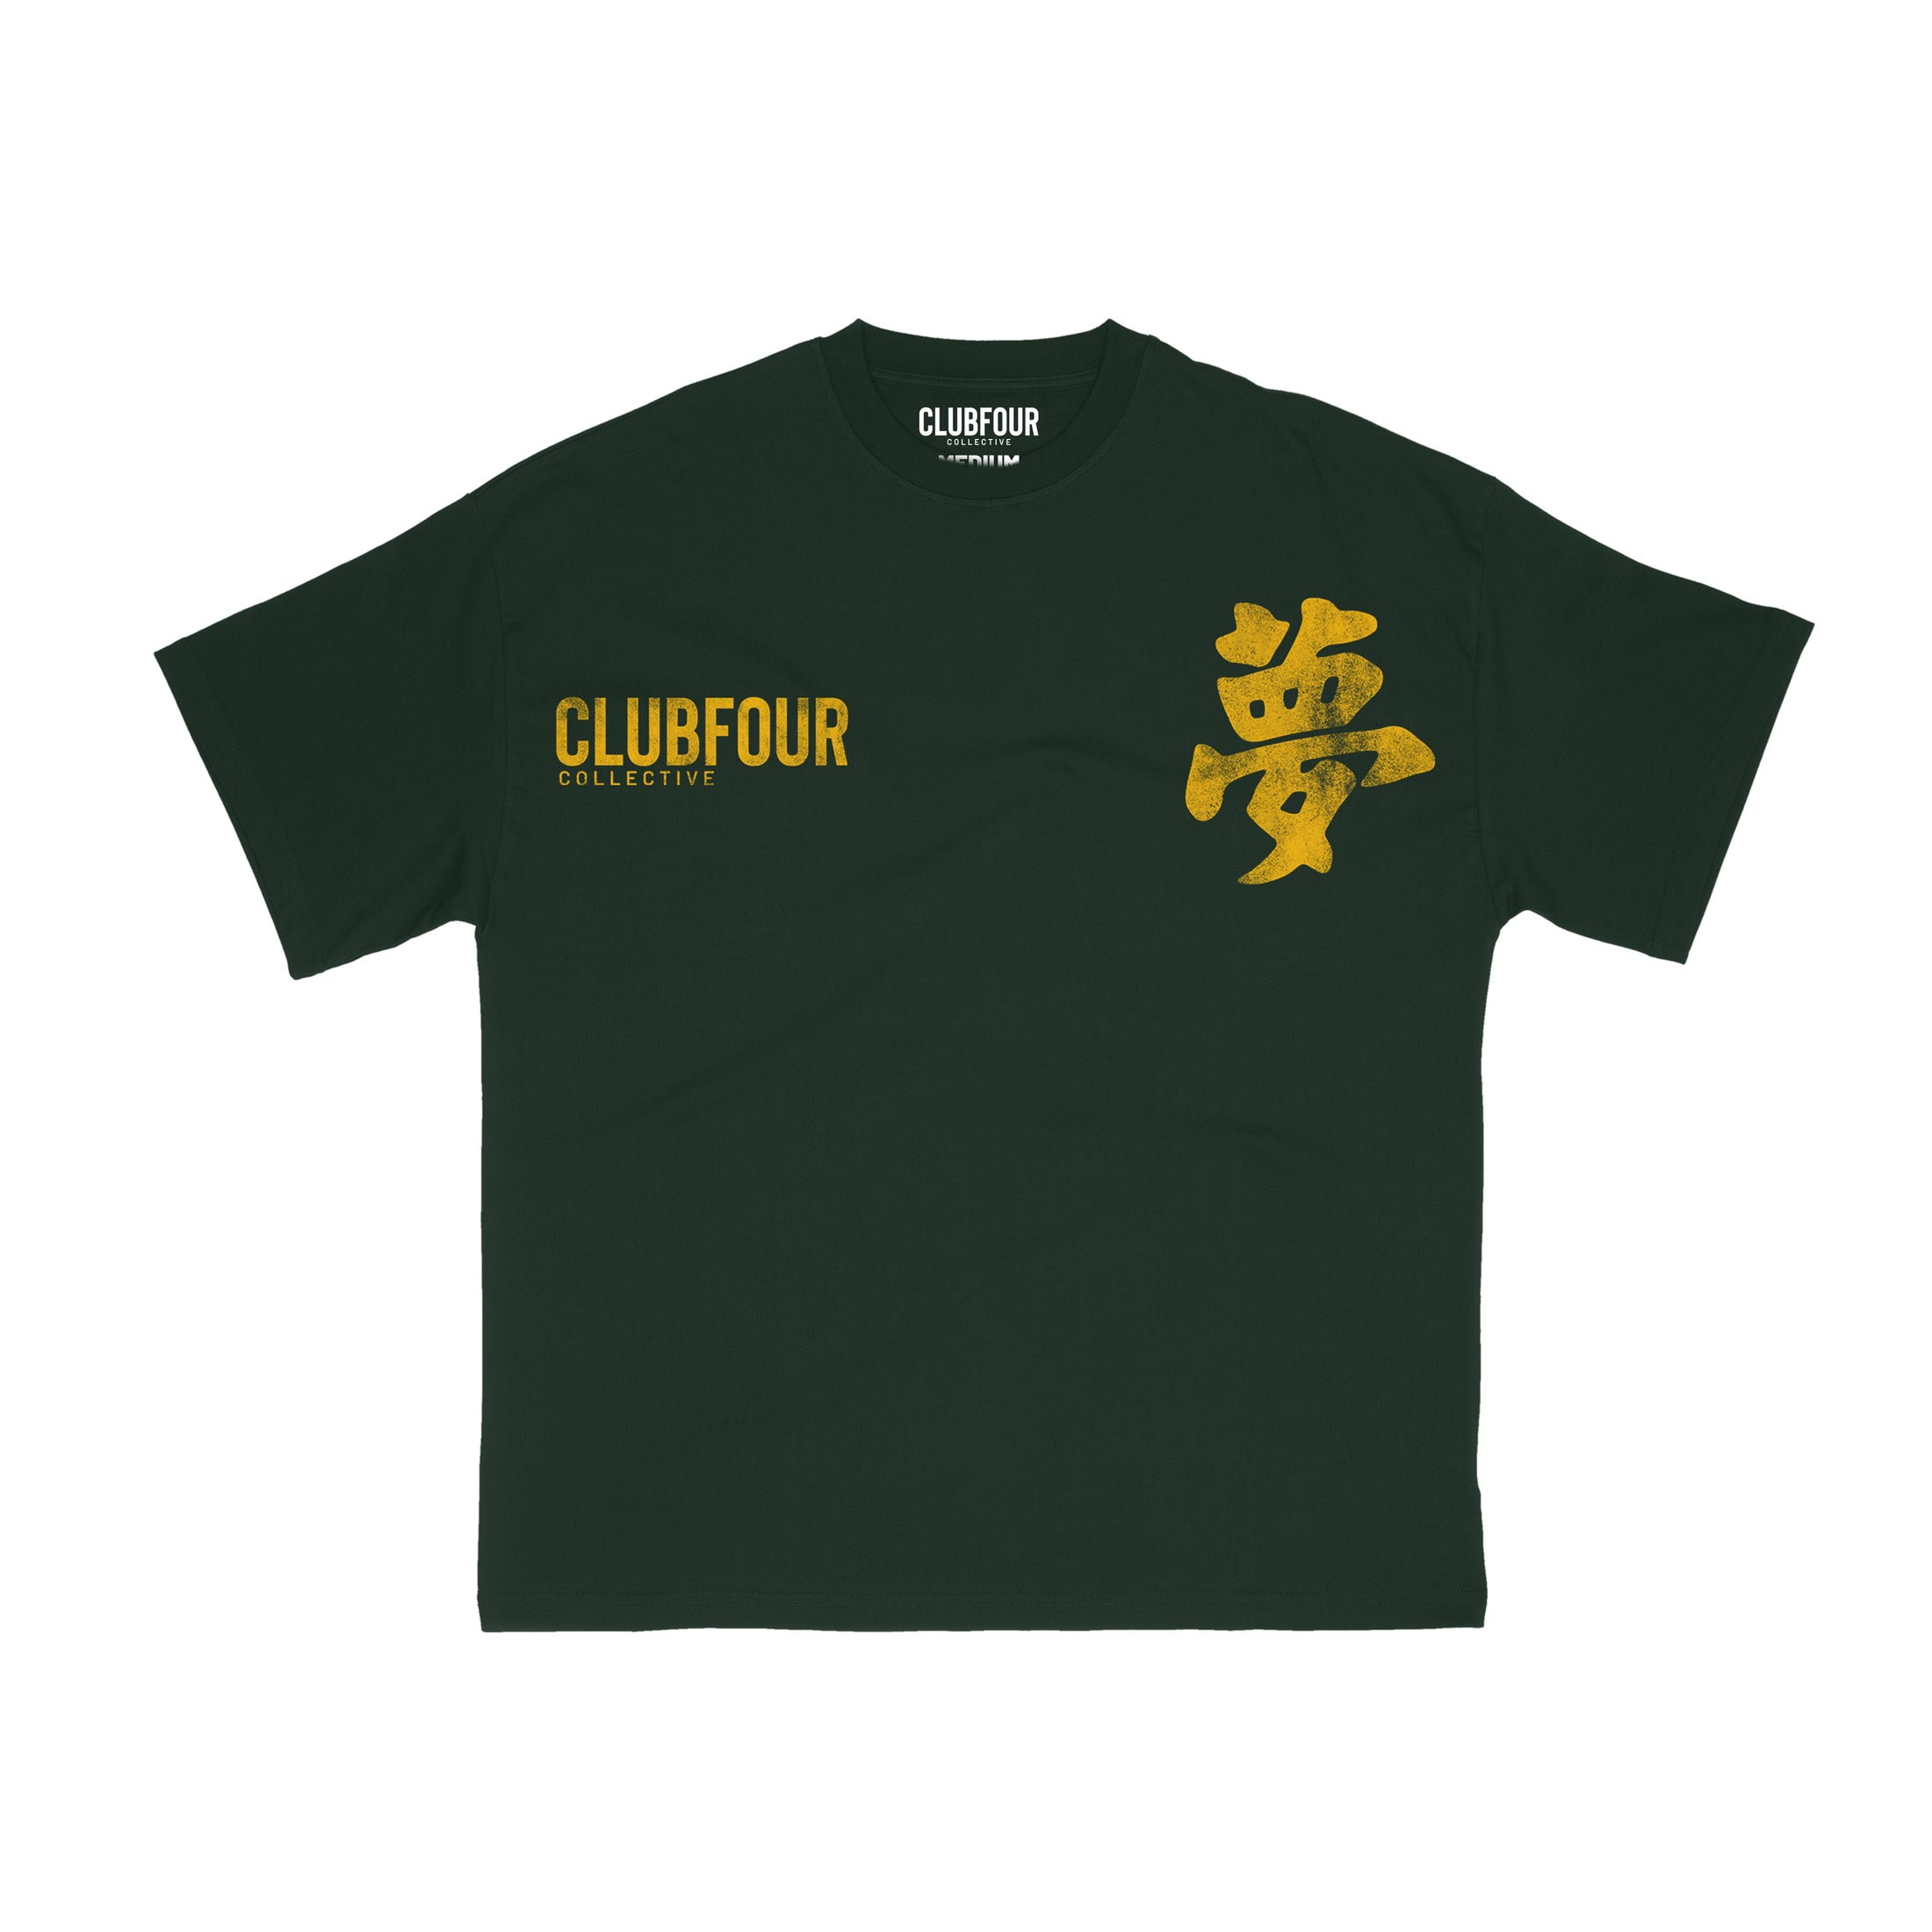 SOLD OUT (Green/Gold)